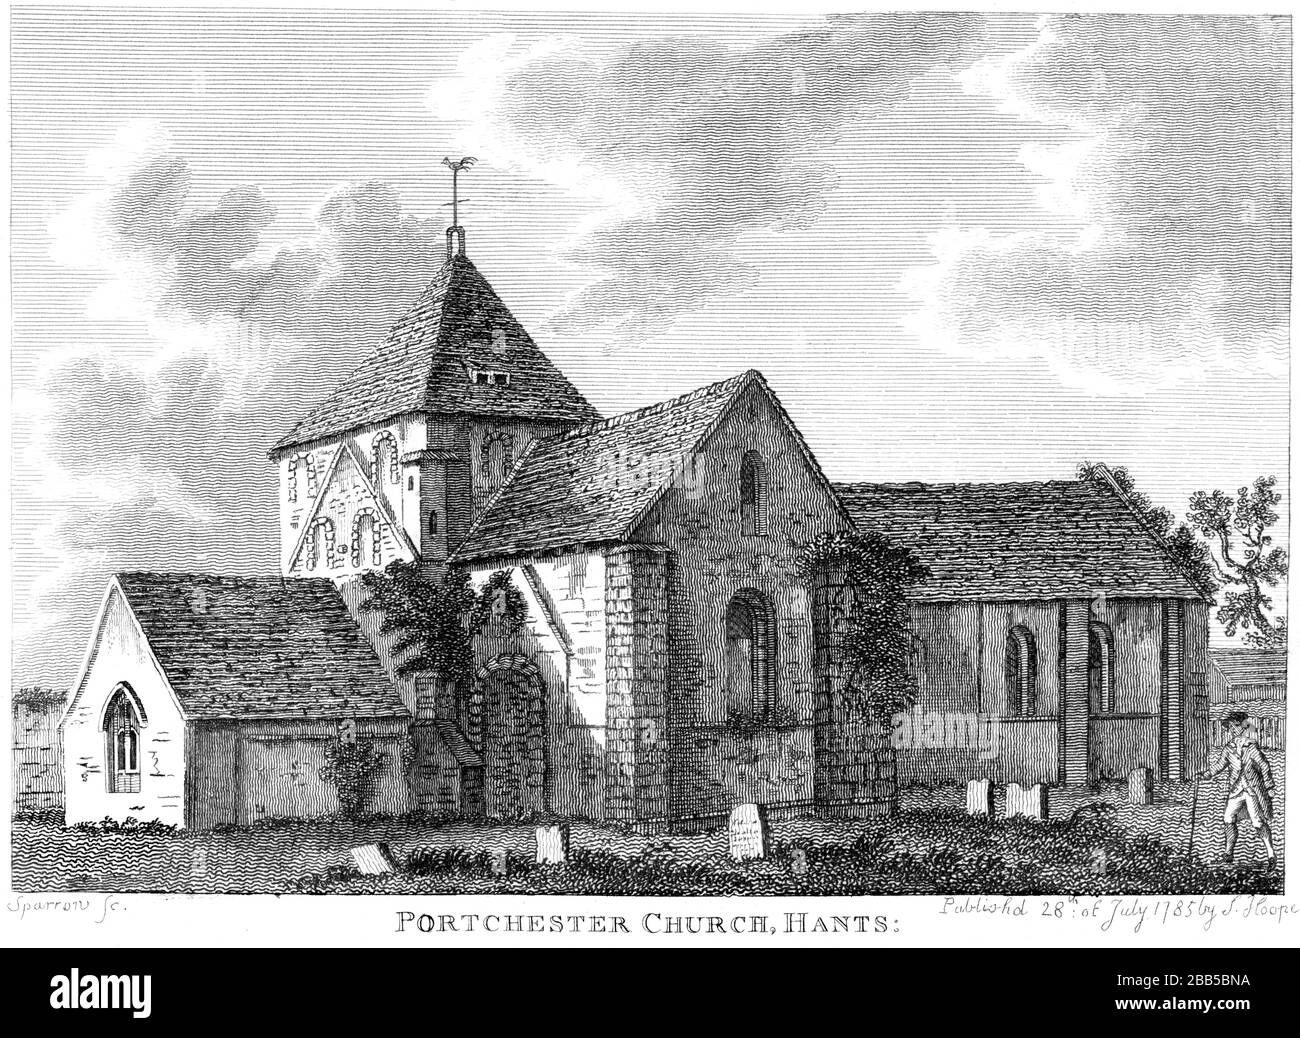 An engraving of Portchester Church Hants 1785 scanned at high resolution from a book published around 1786.  Believed copyright free. Stock Photo